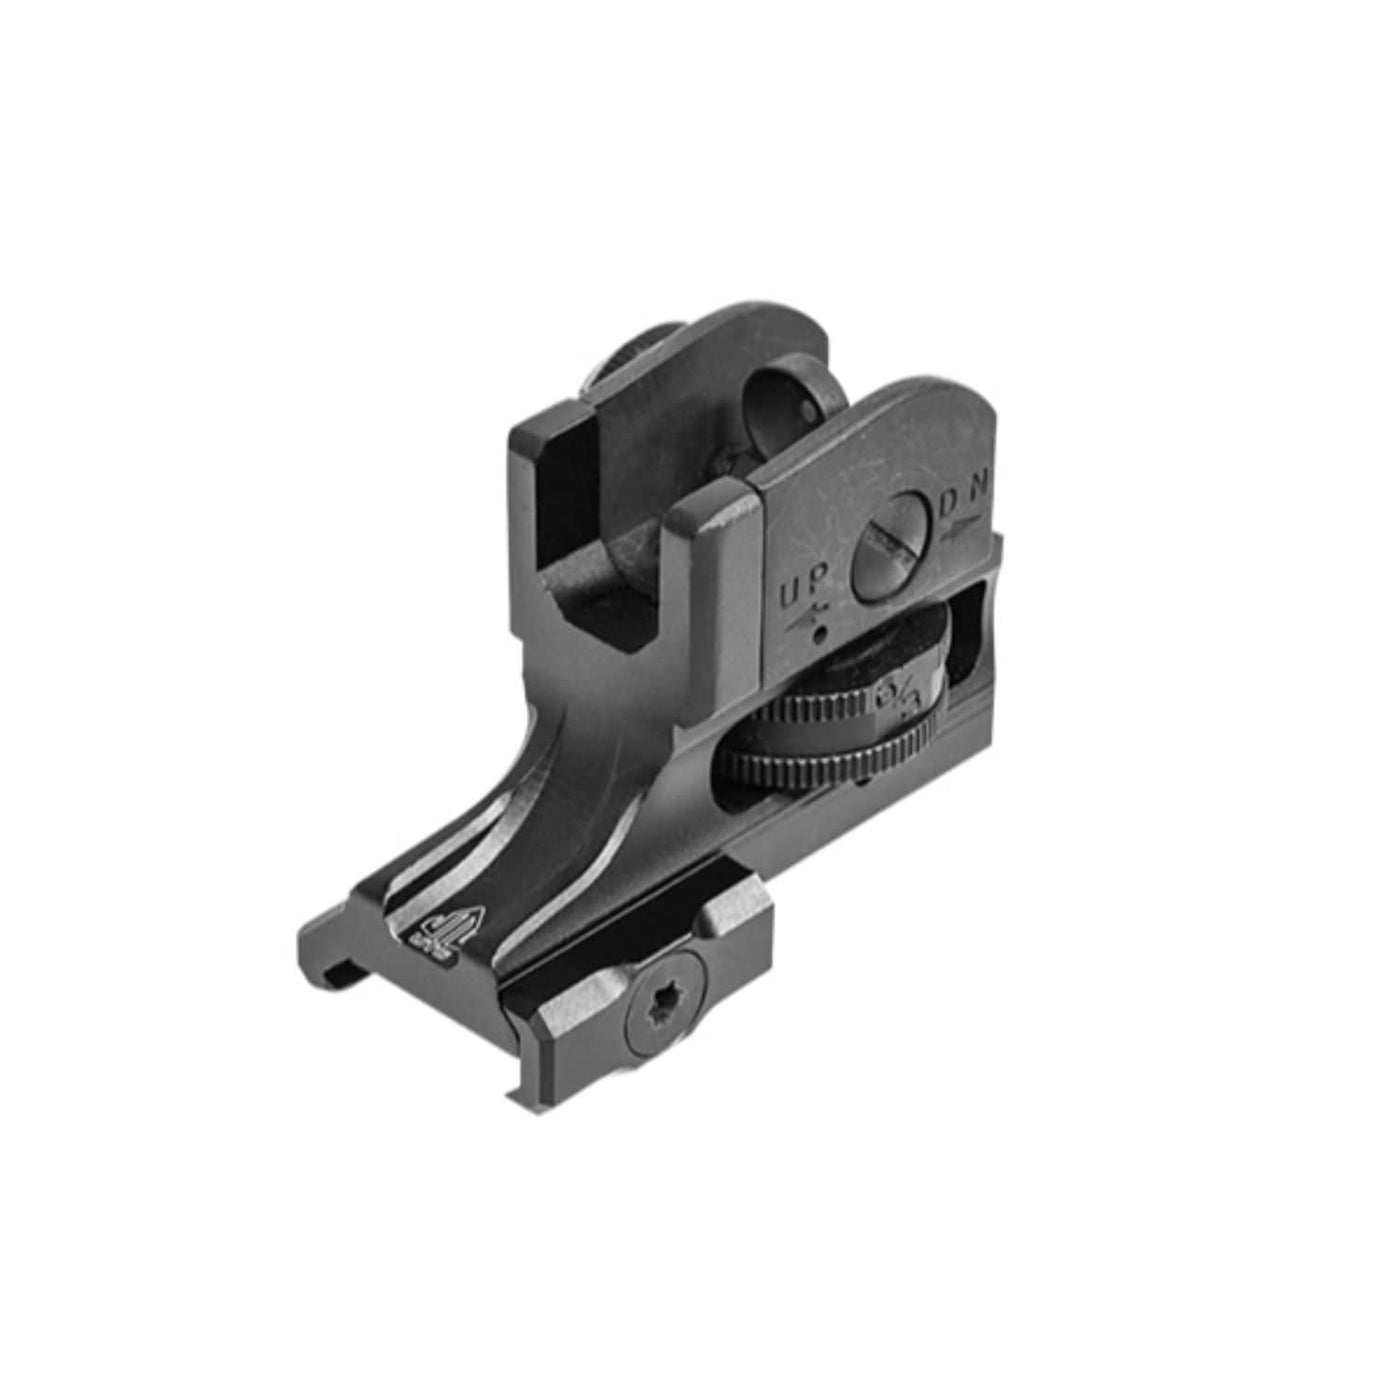 Leapers Leapers UTG AR15 Super Slim Fixed Rear Sight Picatinny Optics And Sights